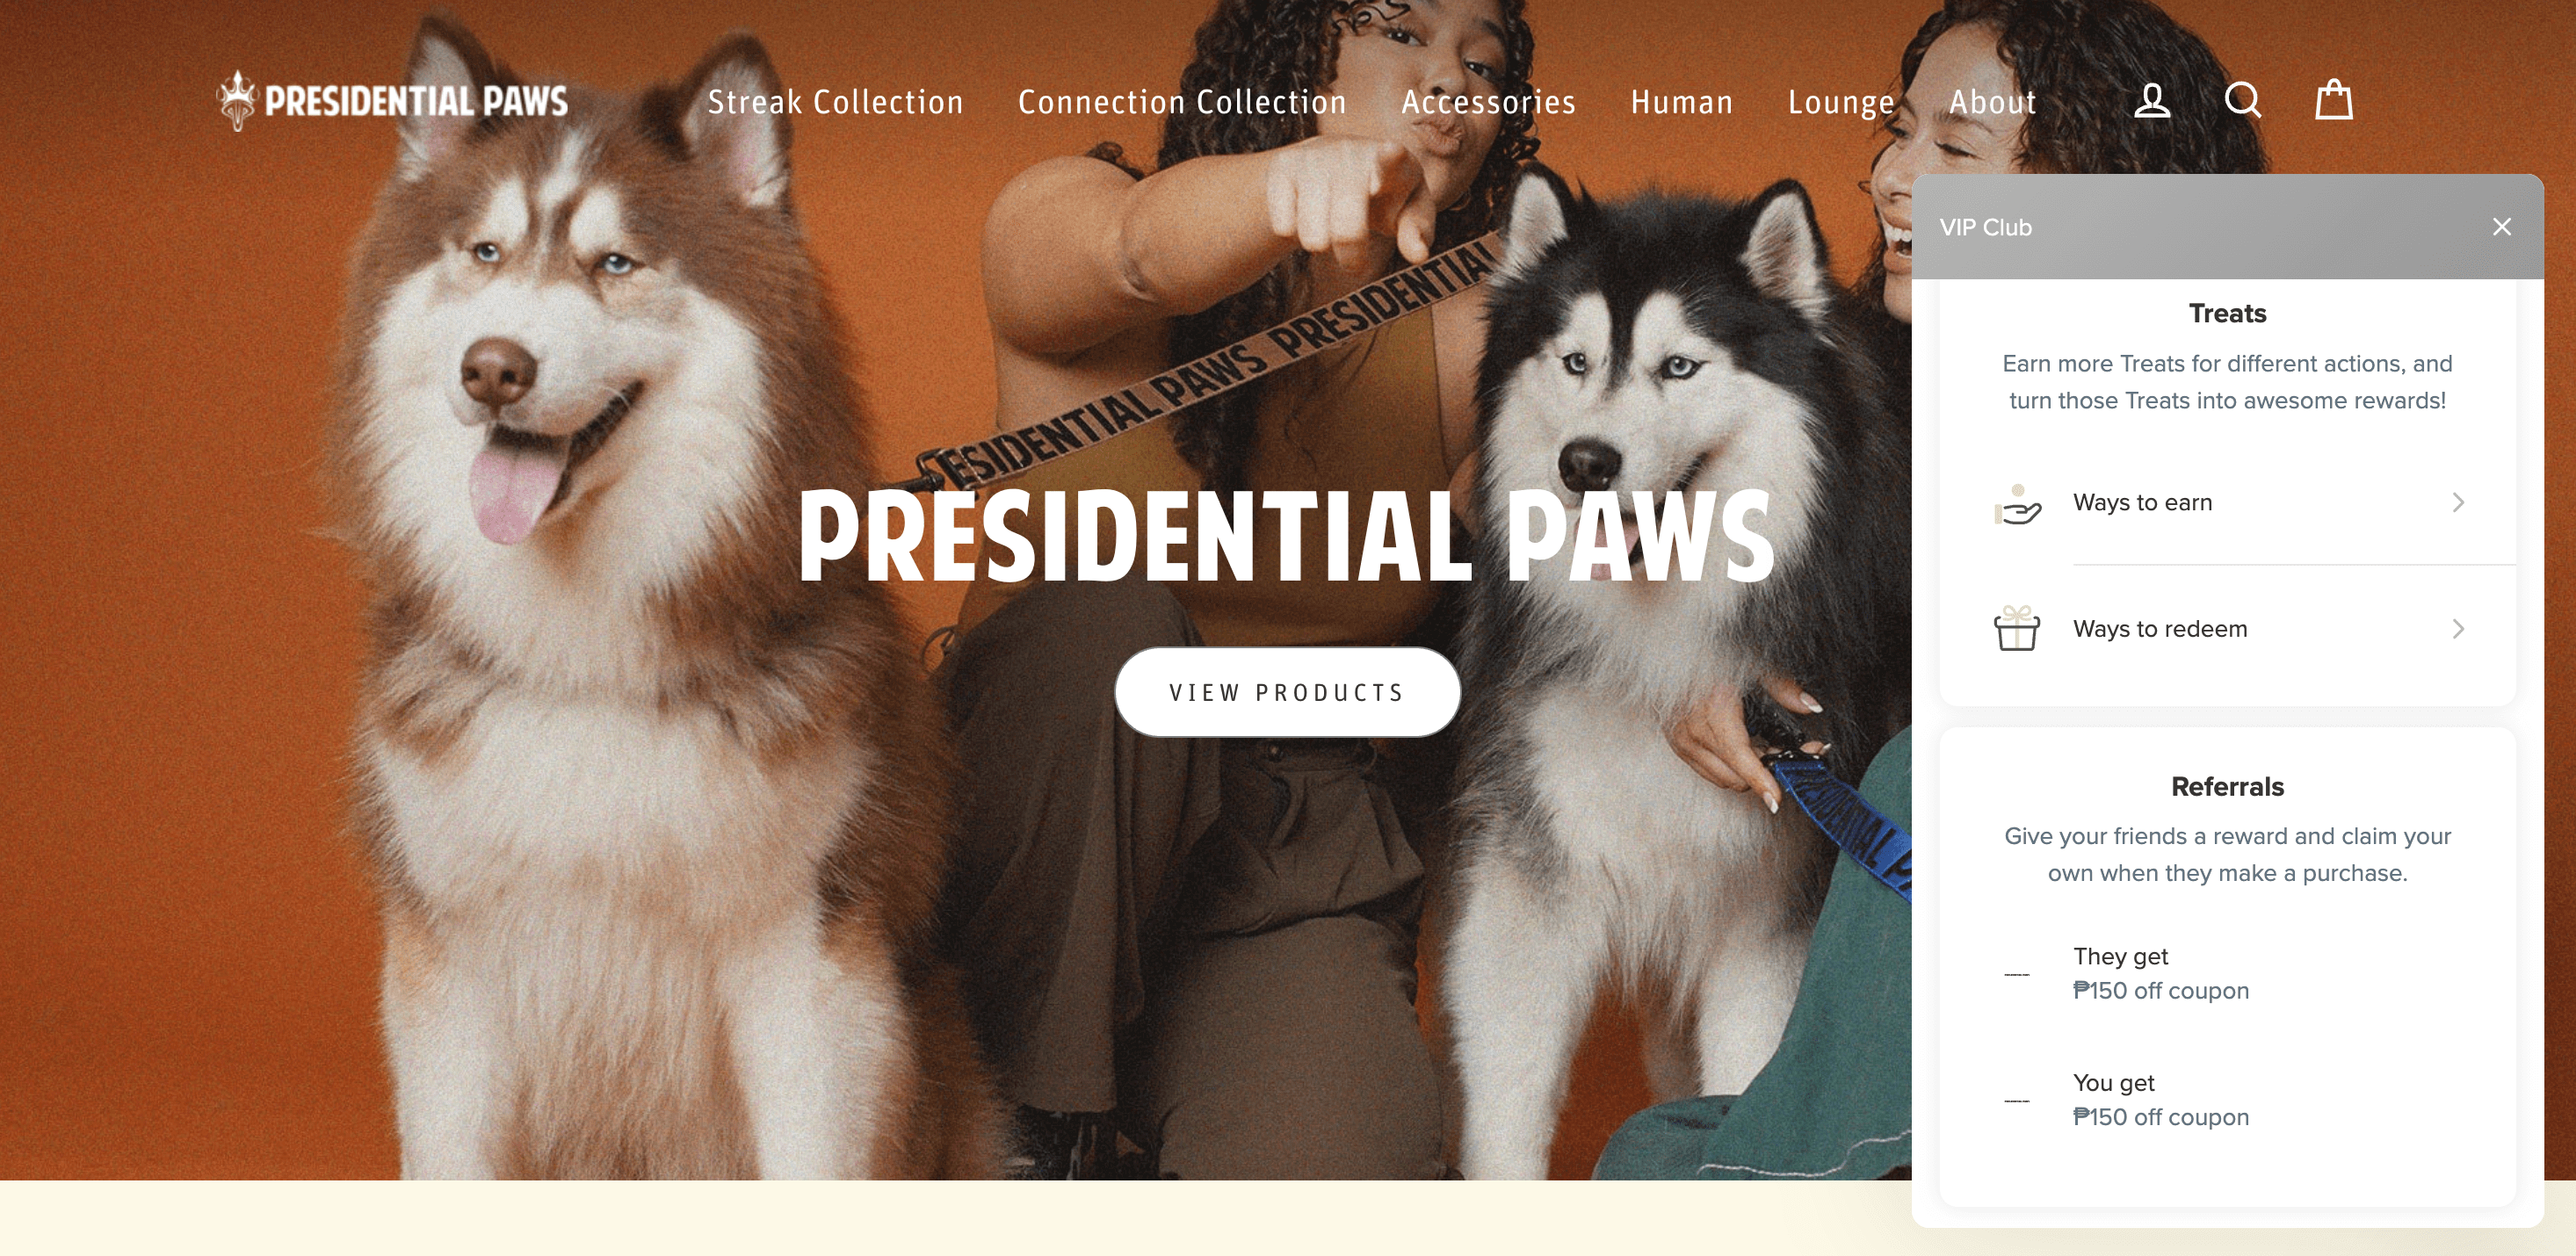 A screenshot from Presidential Paws’ homepage showing the co-founders posing with their two fluffy husky dogs. On the side of the page is its Presidential Paws VIP Club rewards program panel.